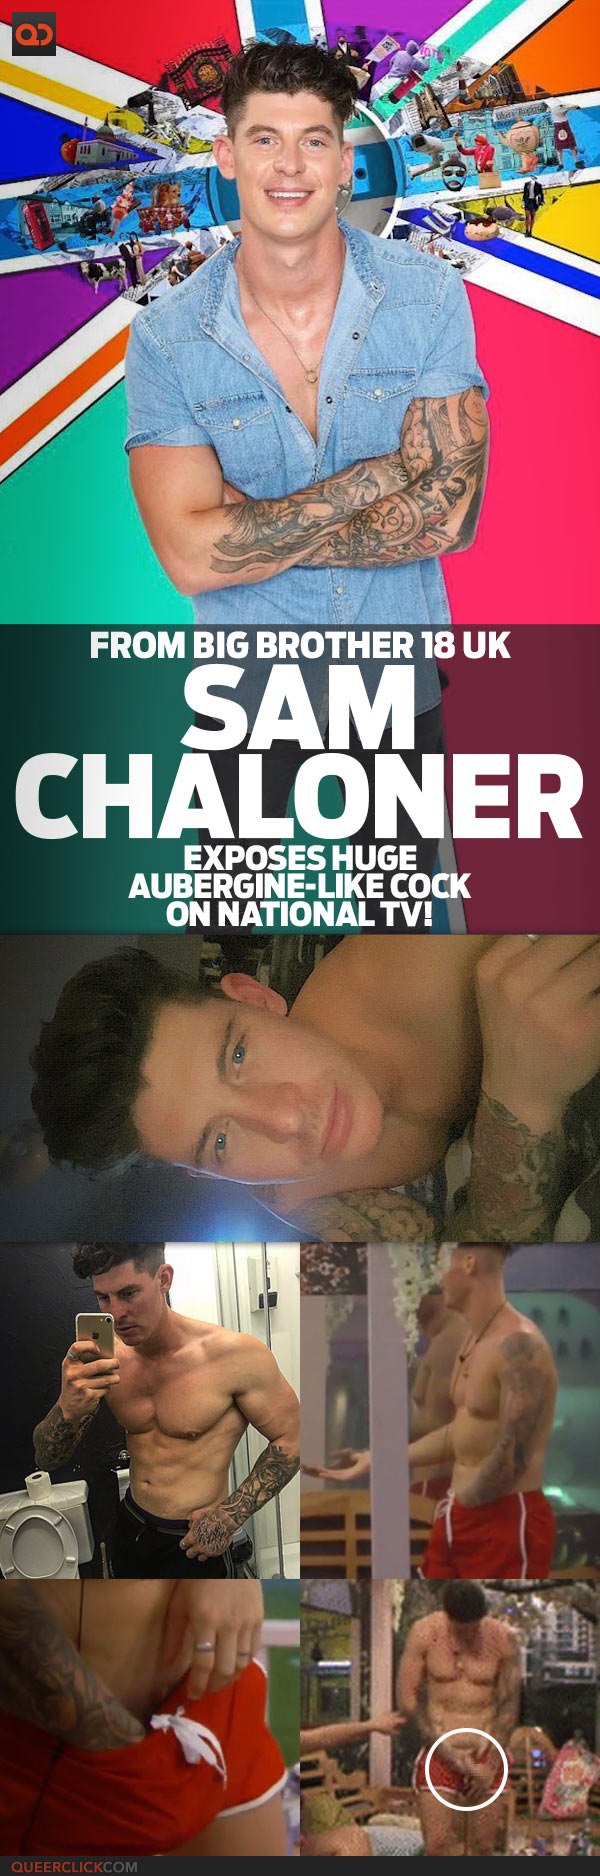 Sam Chaloner, From Big Brother 18 UK, Exposes Huge Aubergine-Like Cock On National TV!